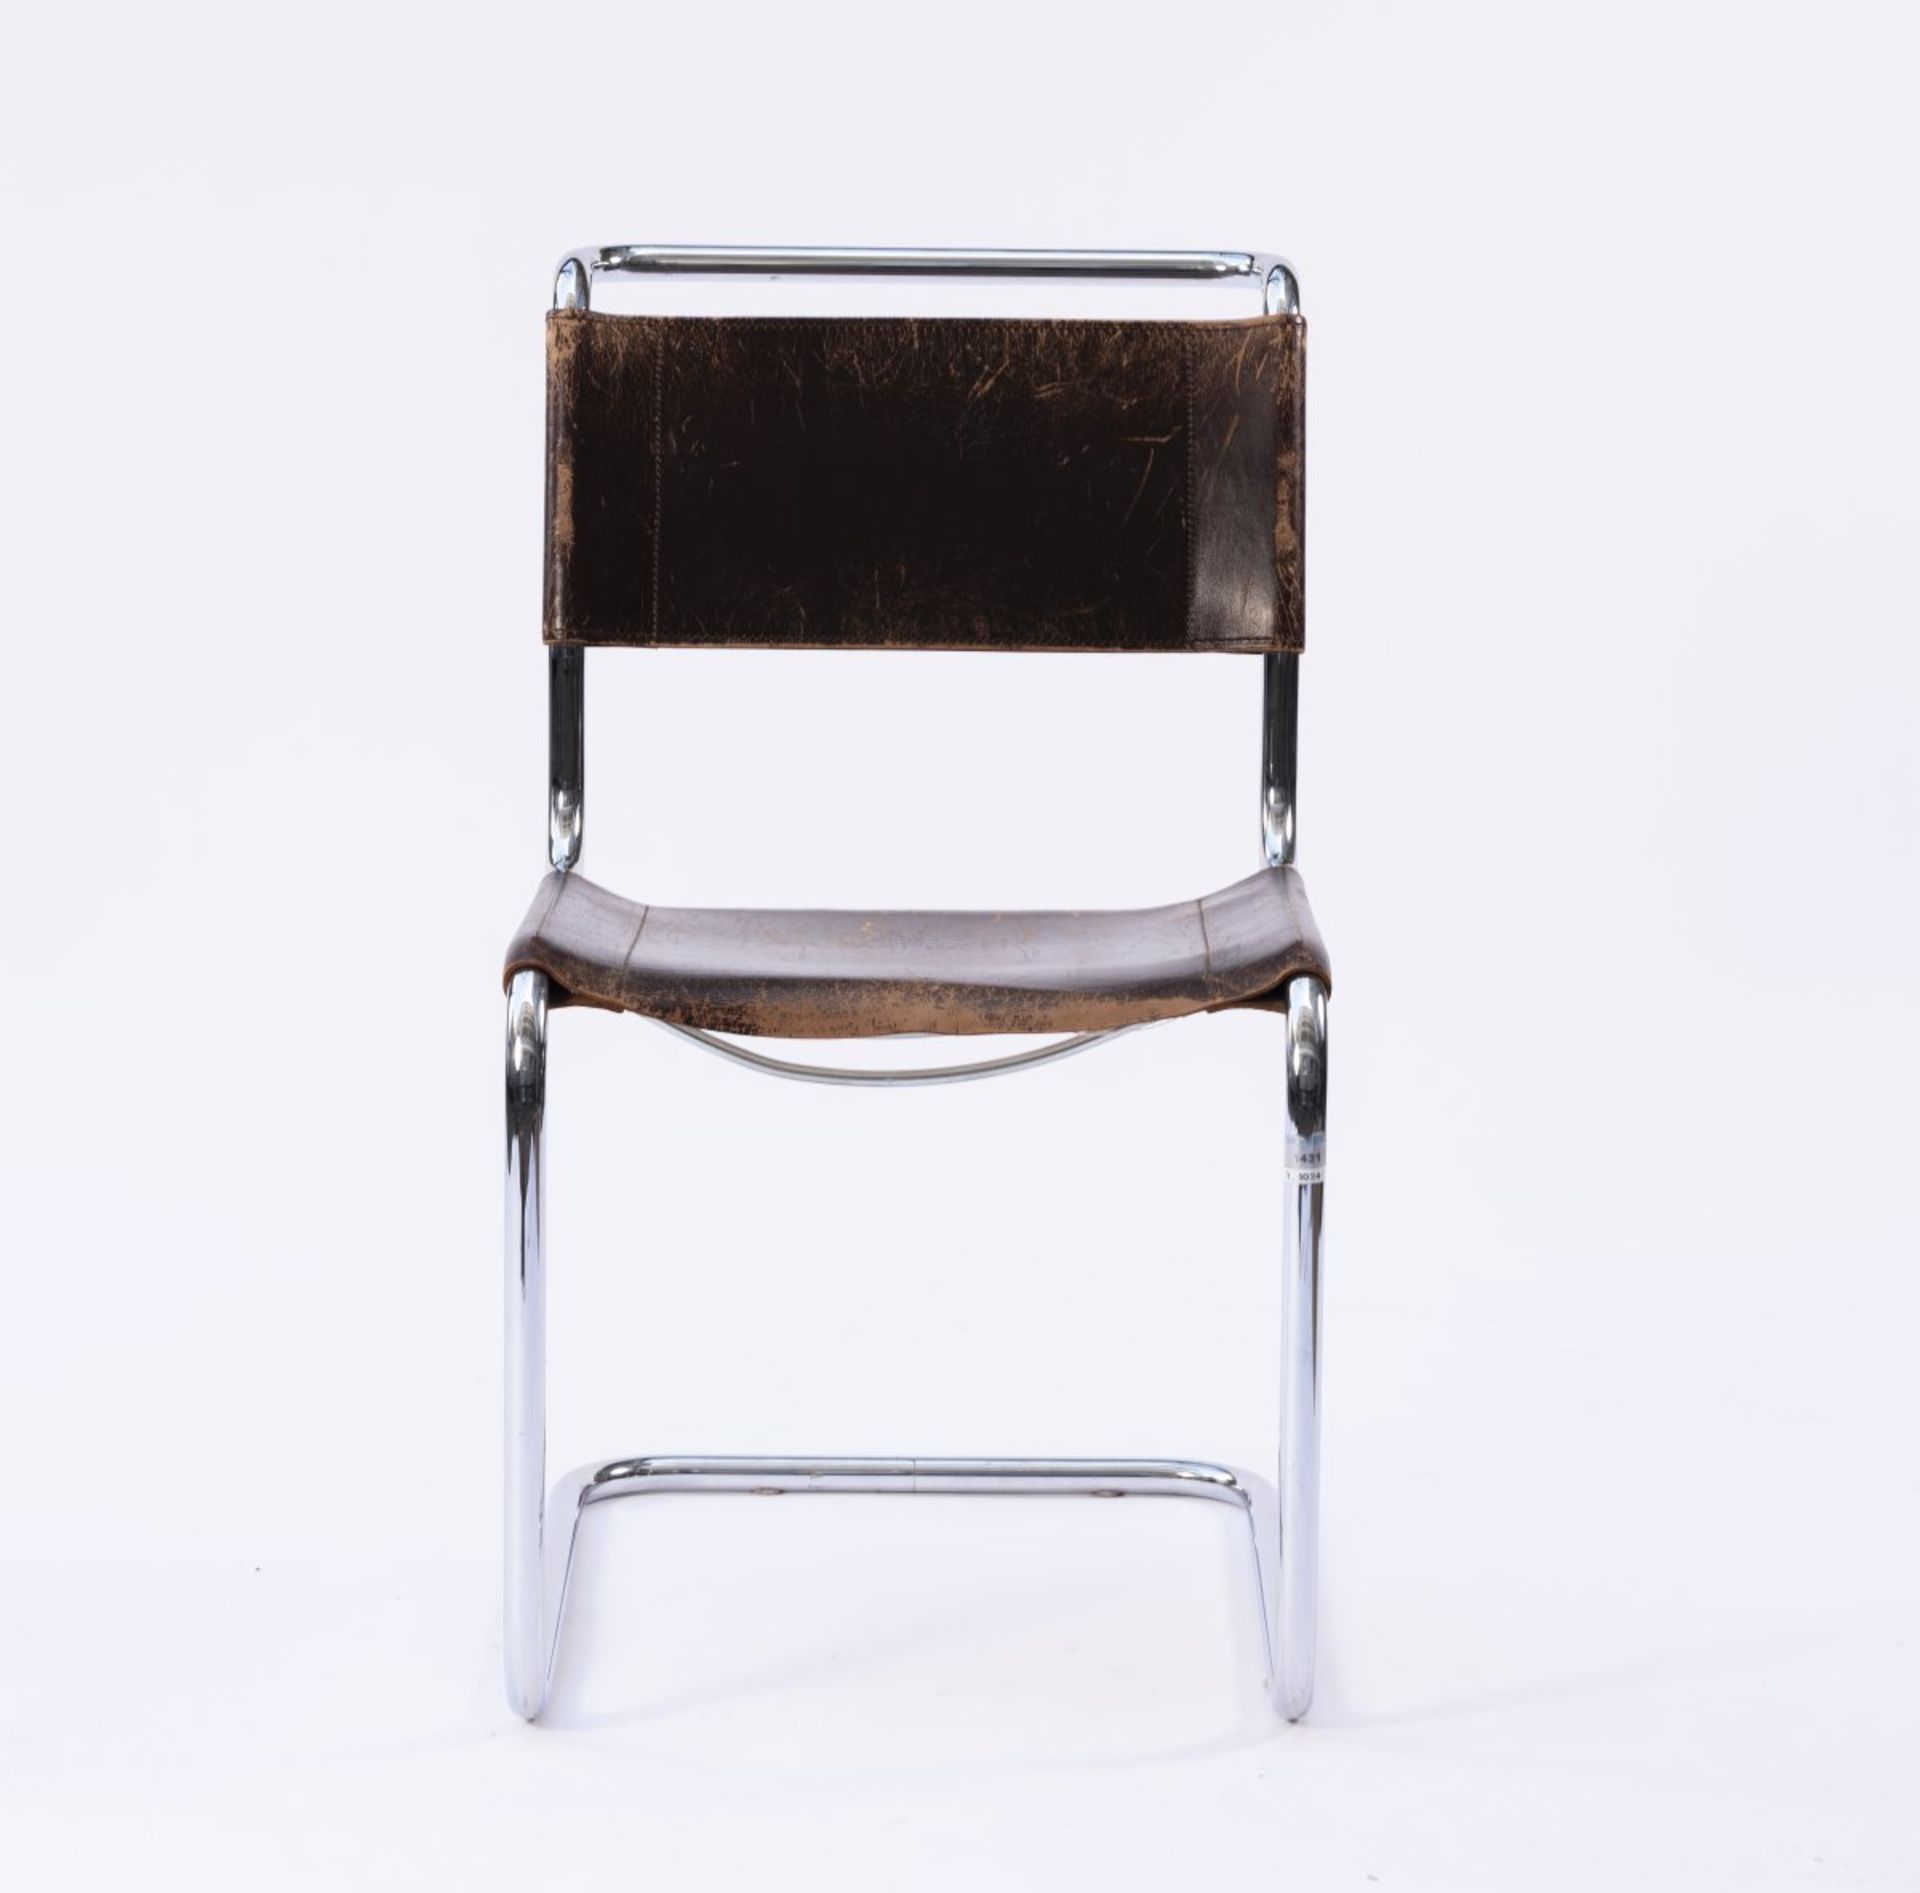 Marcel Breuer, Eight chairs 'B 33', 1927/28 - Image 7 of 14